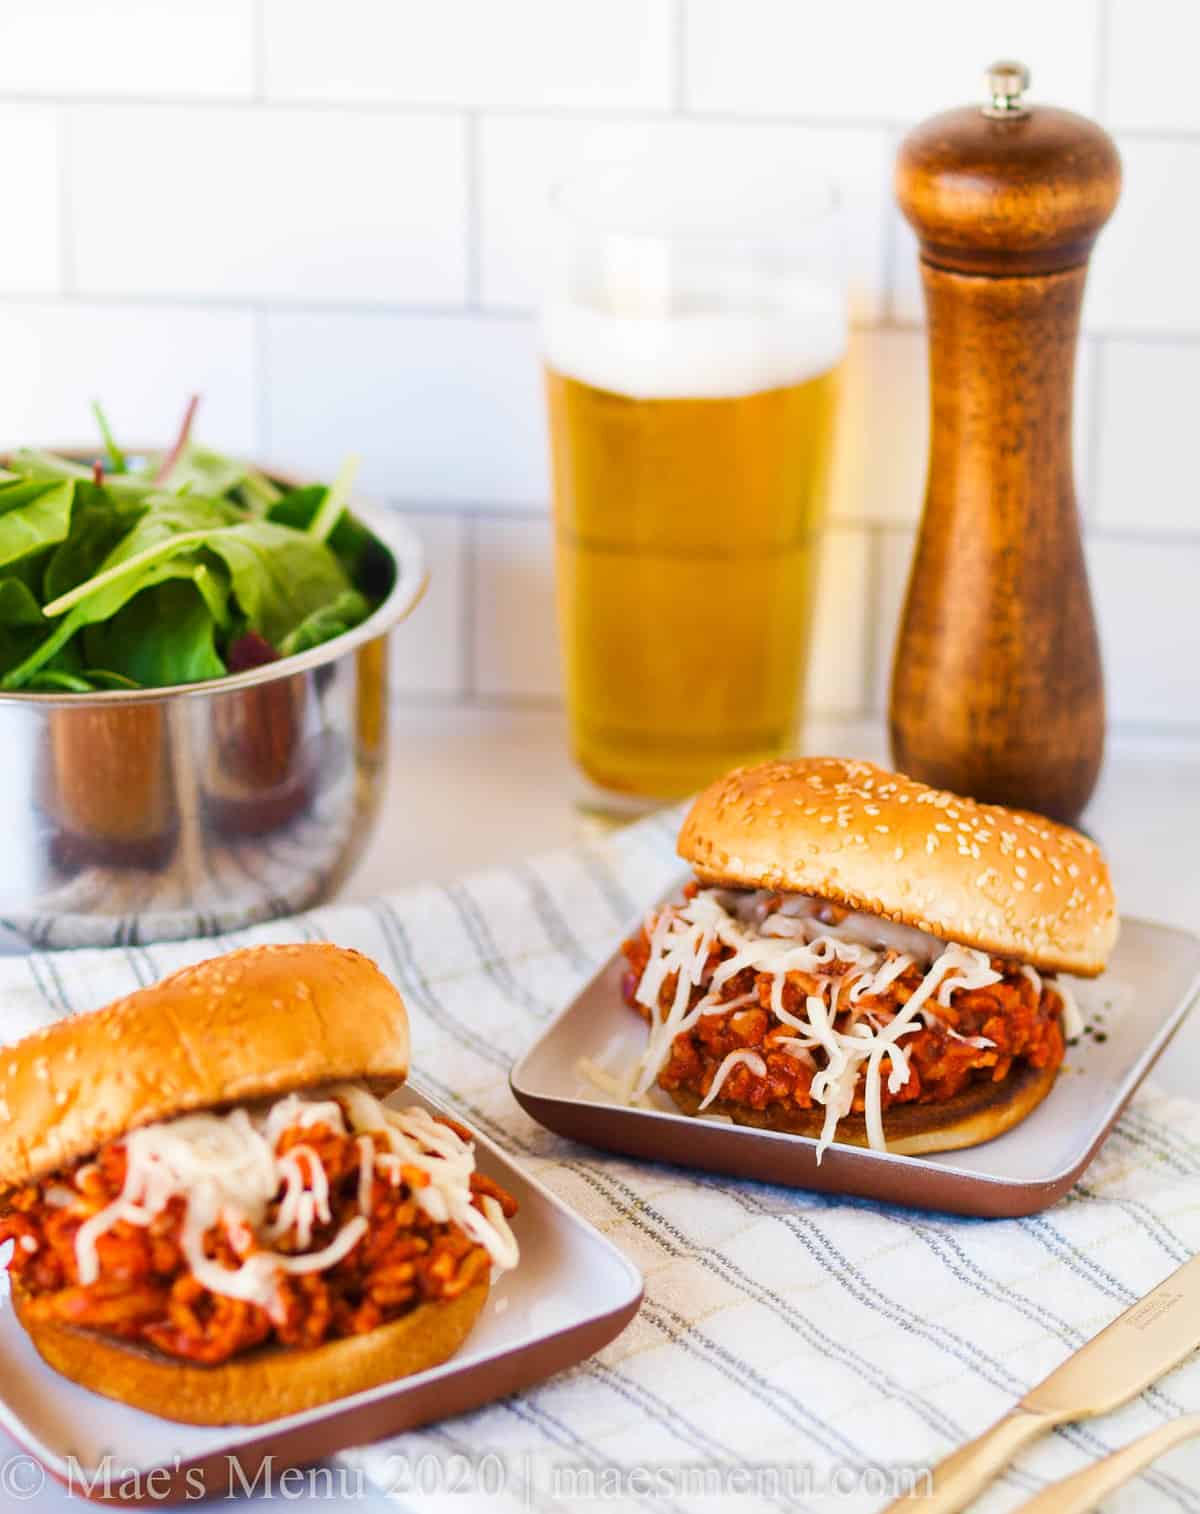 Two small plates of sloppy joes on a checkered napkin in front of a bowl of salad, a glass of beer, and a pepper grinder. 